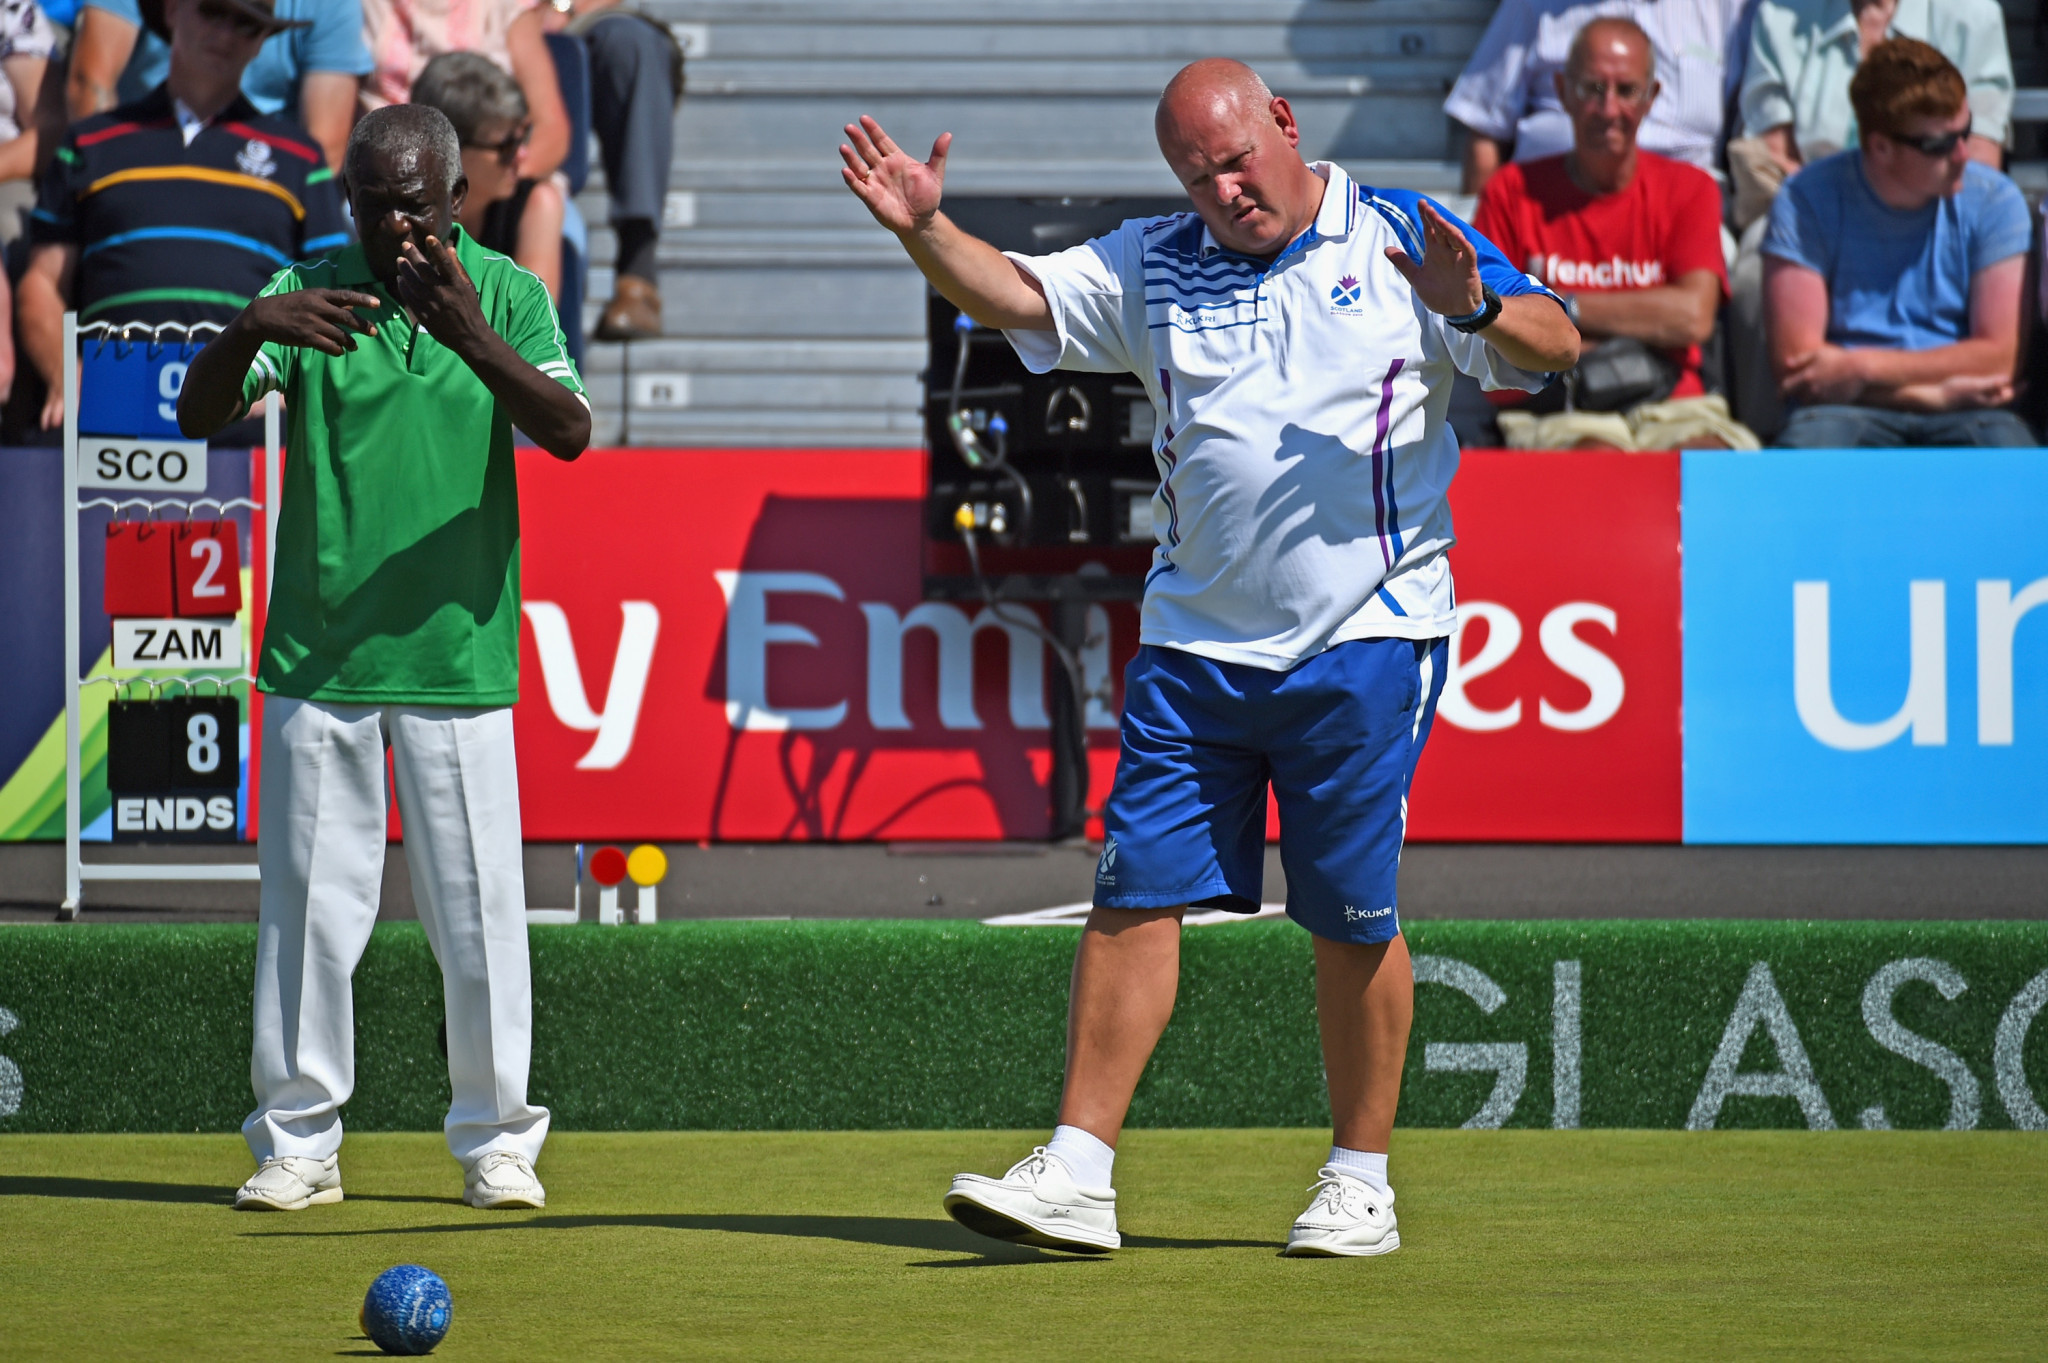 Scotland's Alex Marshall, right, is seeking a record-breaking seventh medal and sixth gold in lawn bowls at the Commonwealth Games ©Getty Images